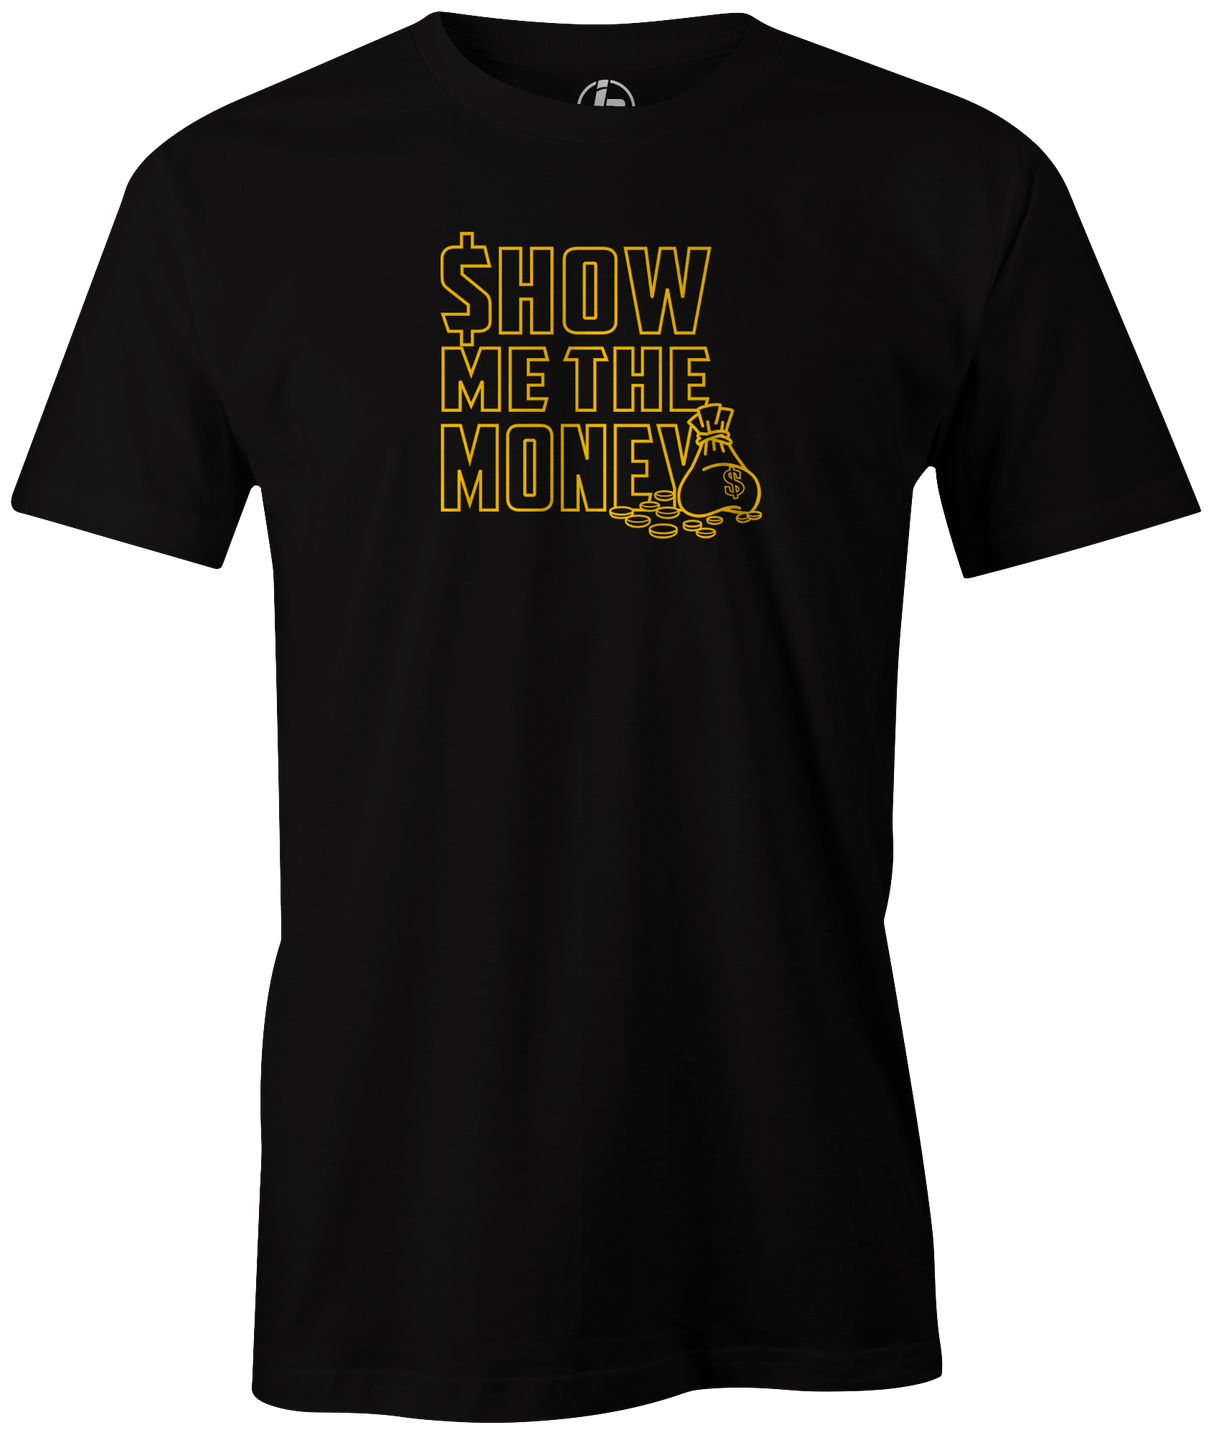 Show Me The Money by Swag Bowling Swag Bowling Classic Logo T-shirt. This shirt is perfect for bowling practice, leagues or weekend tournaments. Men's T-Shirt, bowling ball, tee, tee shirt, tee-shirt, t shirt, t-shirt, tees, league, tournament shirt, PBA, PWBA, USBC.